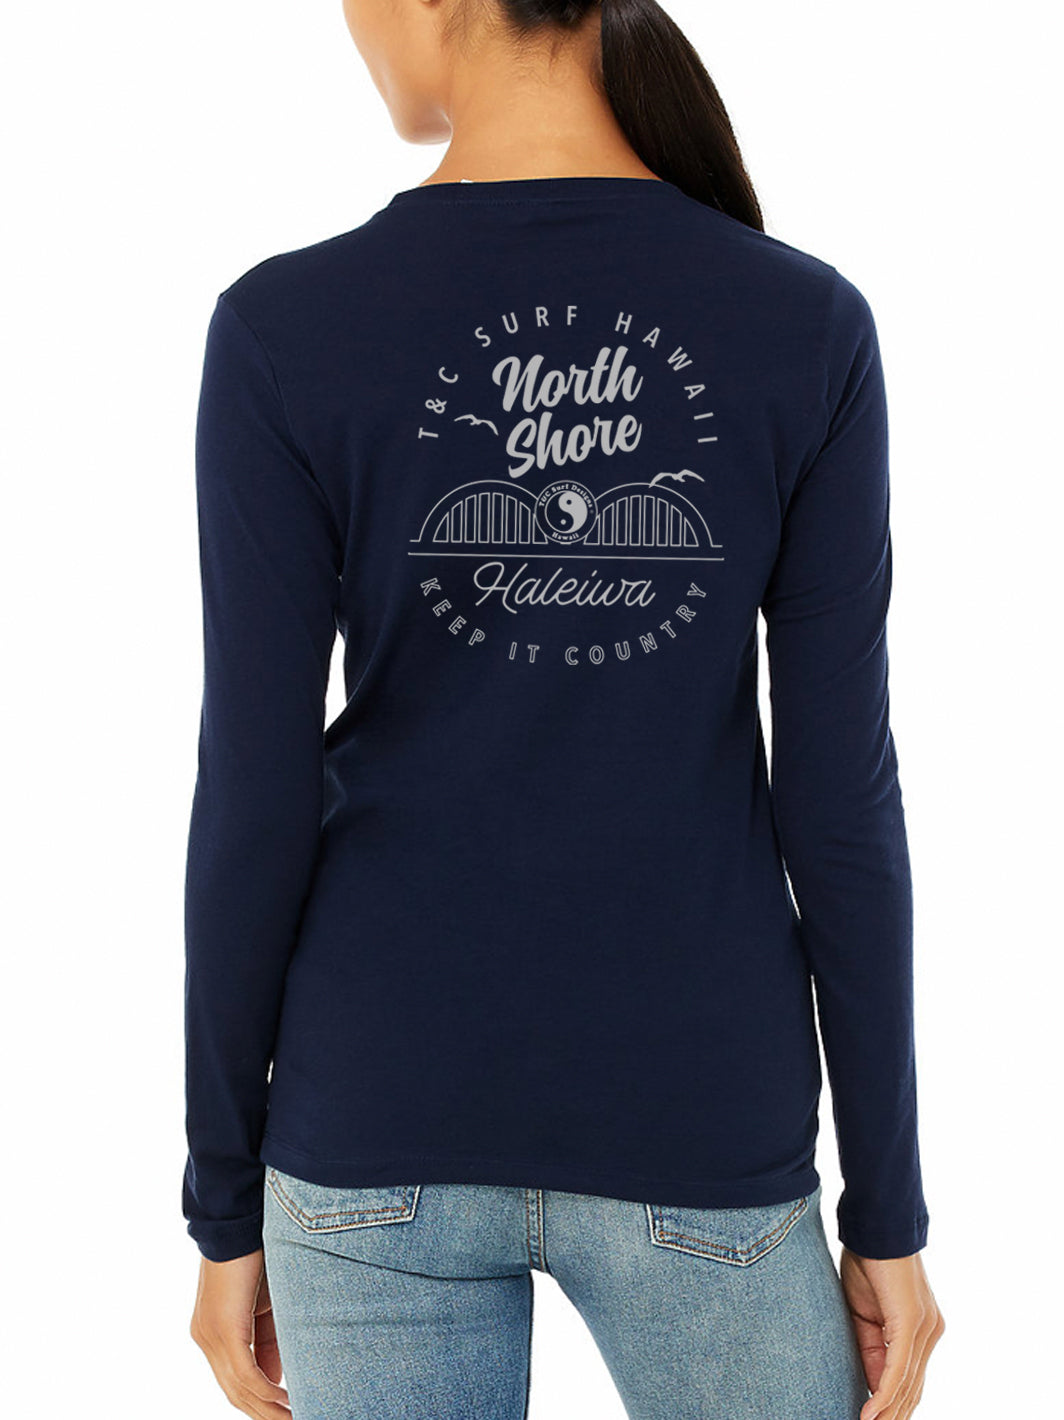 T&C Surf Designs T&C Surf North Shore Oval Long Sleeve, S / Navy